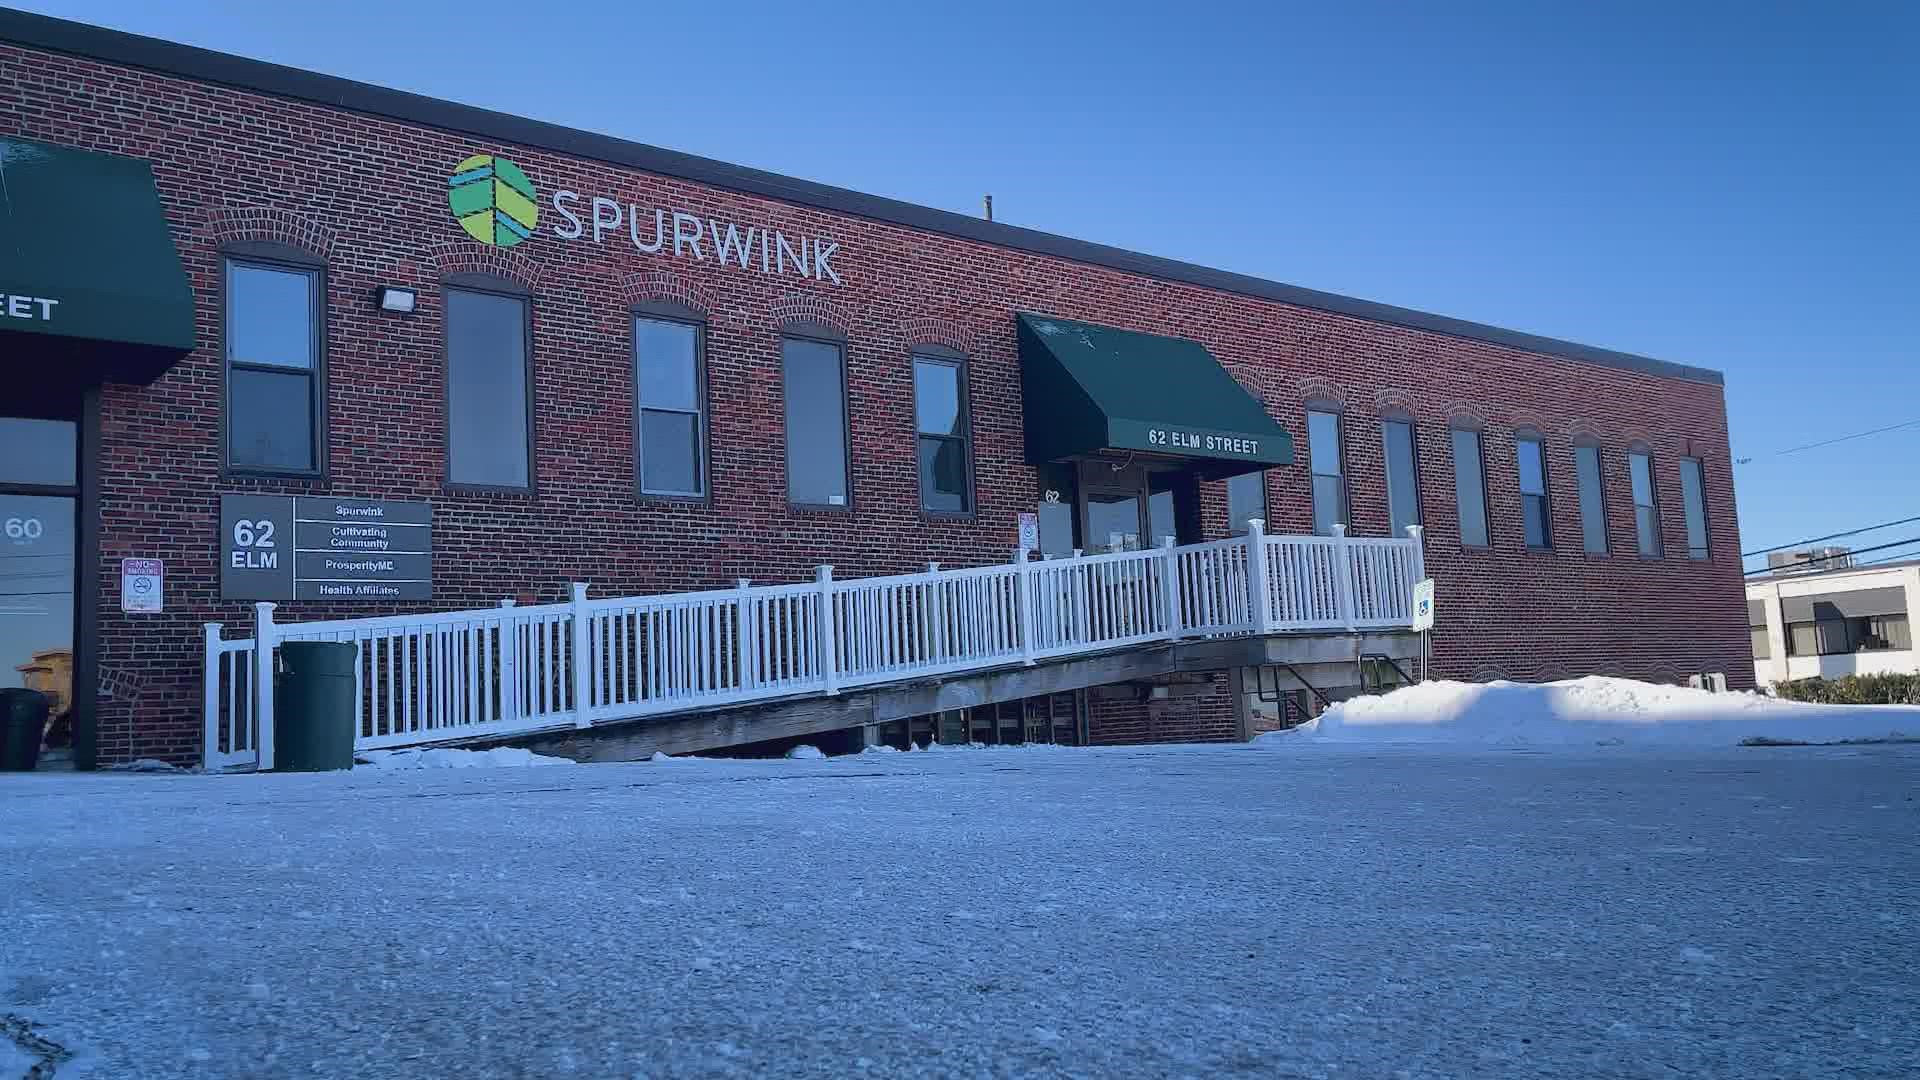 The Crisis Receiving Center at 62 Elm Street is a partnership between Maine's Department of Health and Human Services and Spurwink.